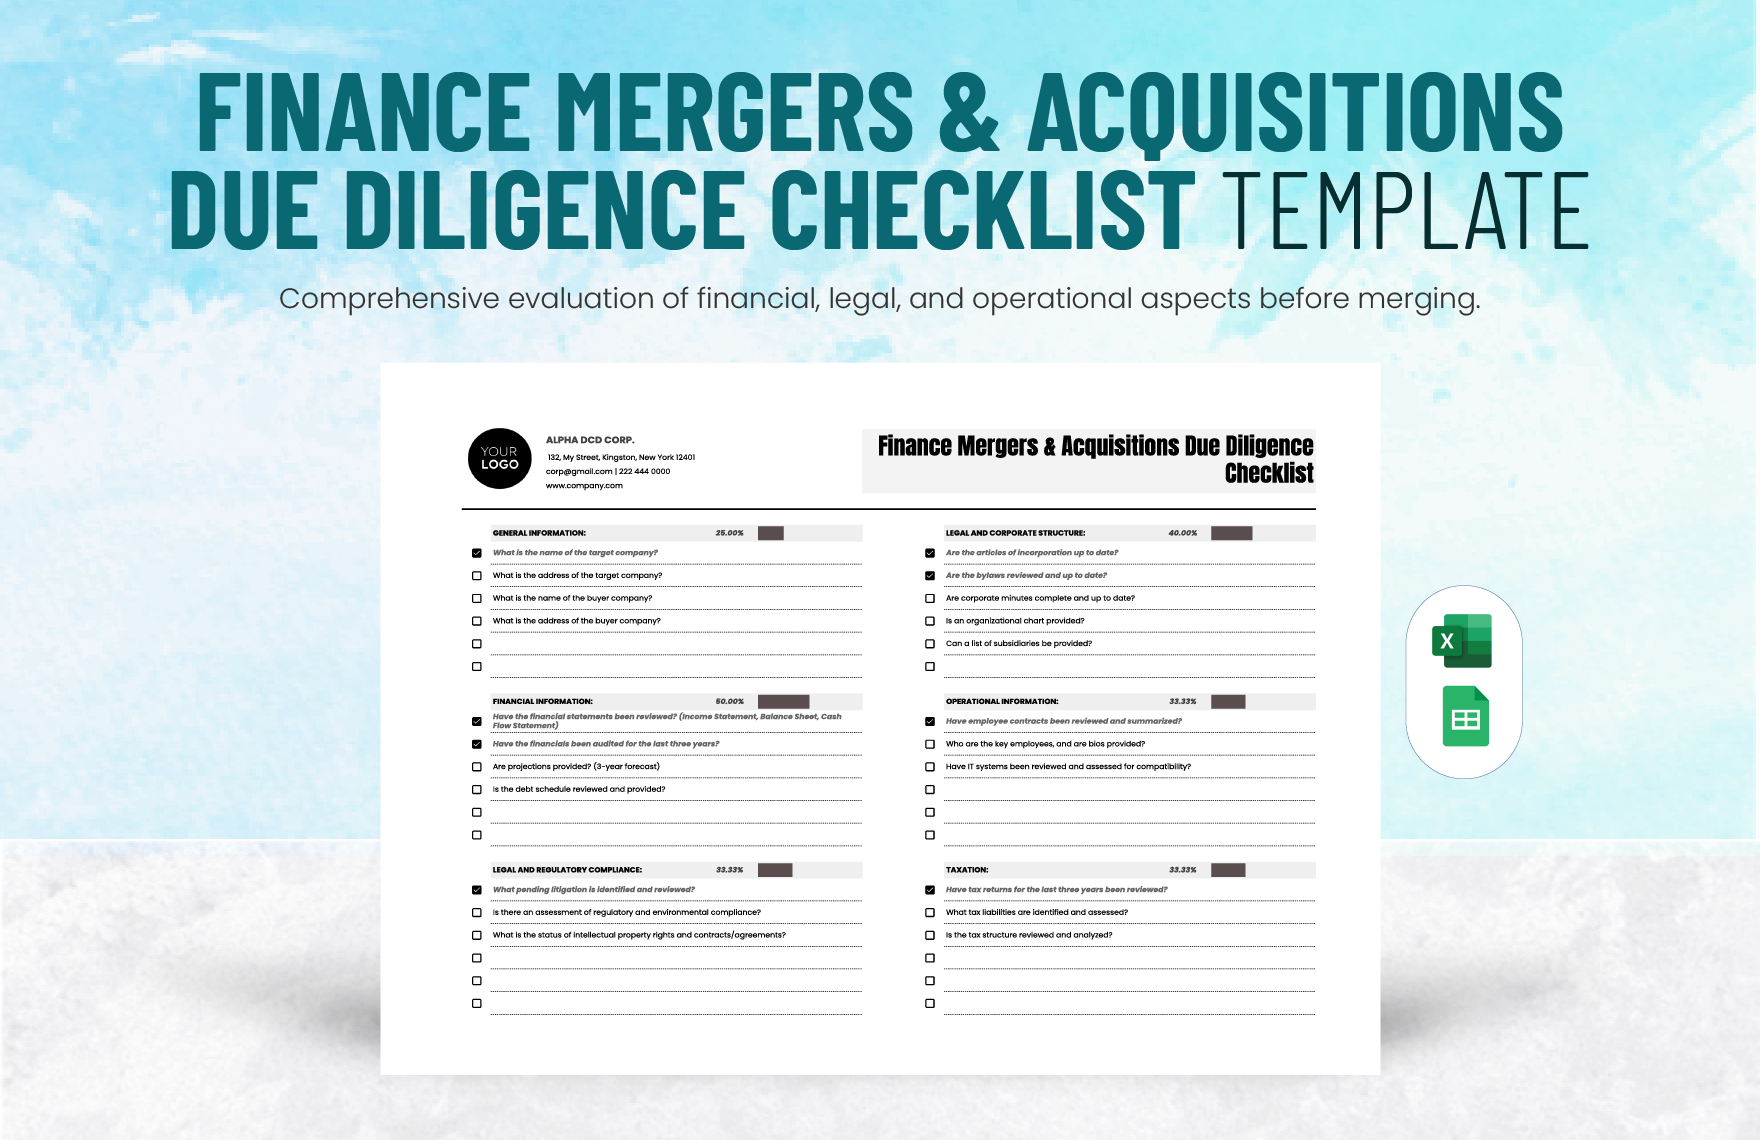 Finance Mergers & Acquisitions Due Diligence Checklist Template in Excel, Google Sheets